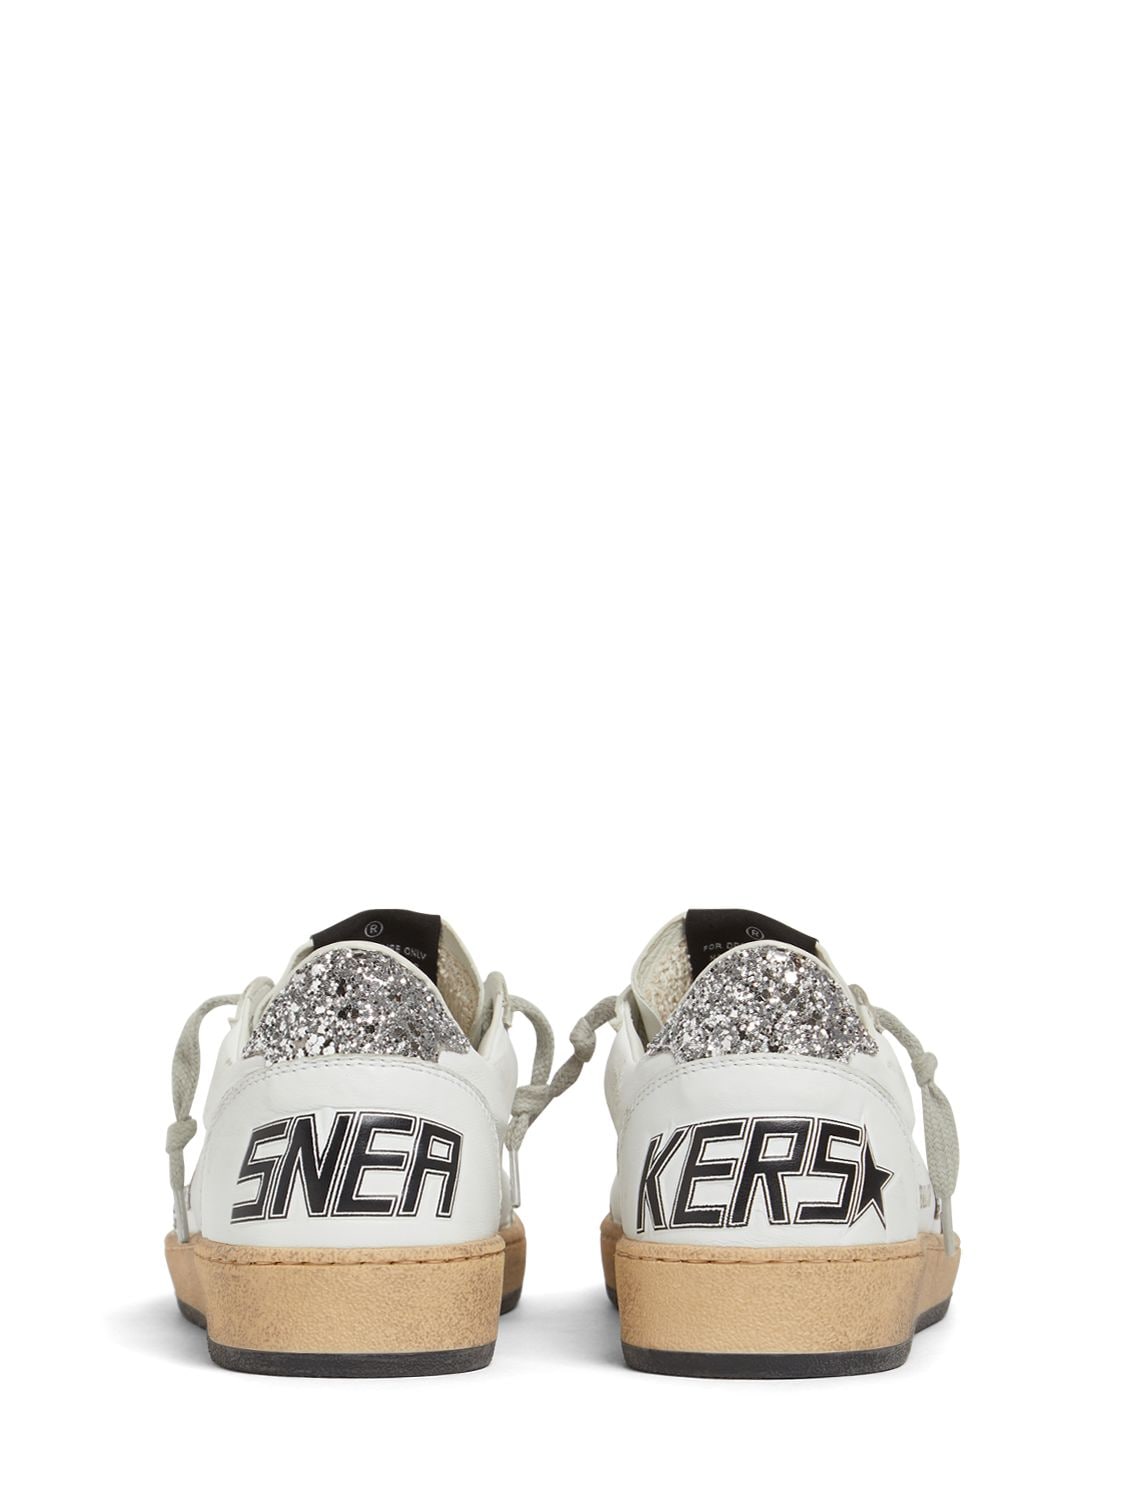 Shop Golden Goose 20mm Ball Star Nappa Leather Sneakers In White,silver